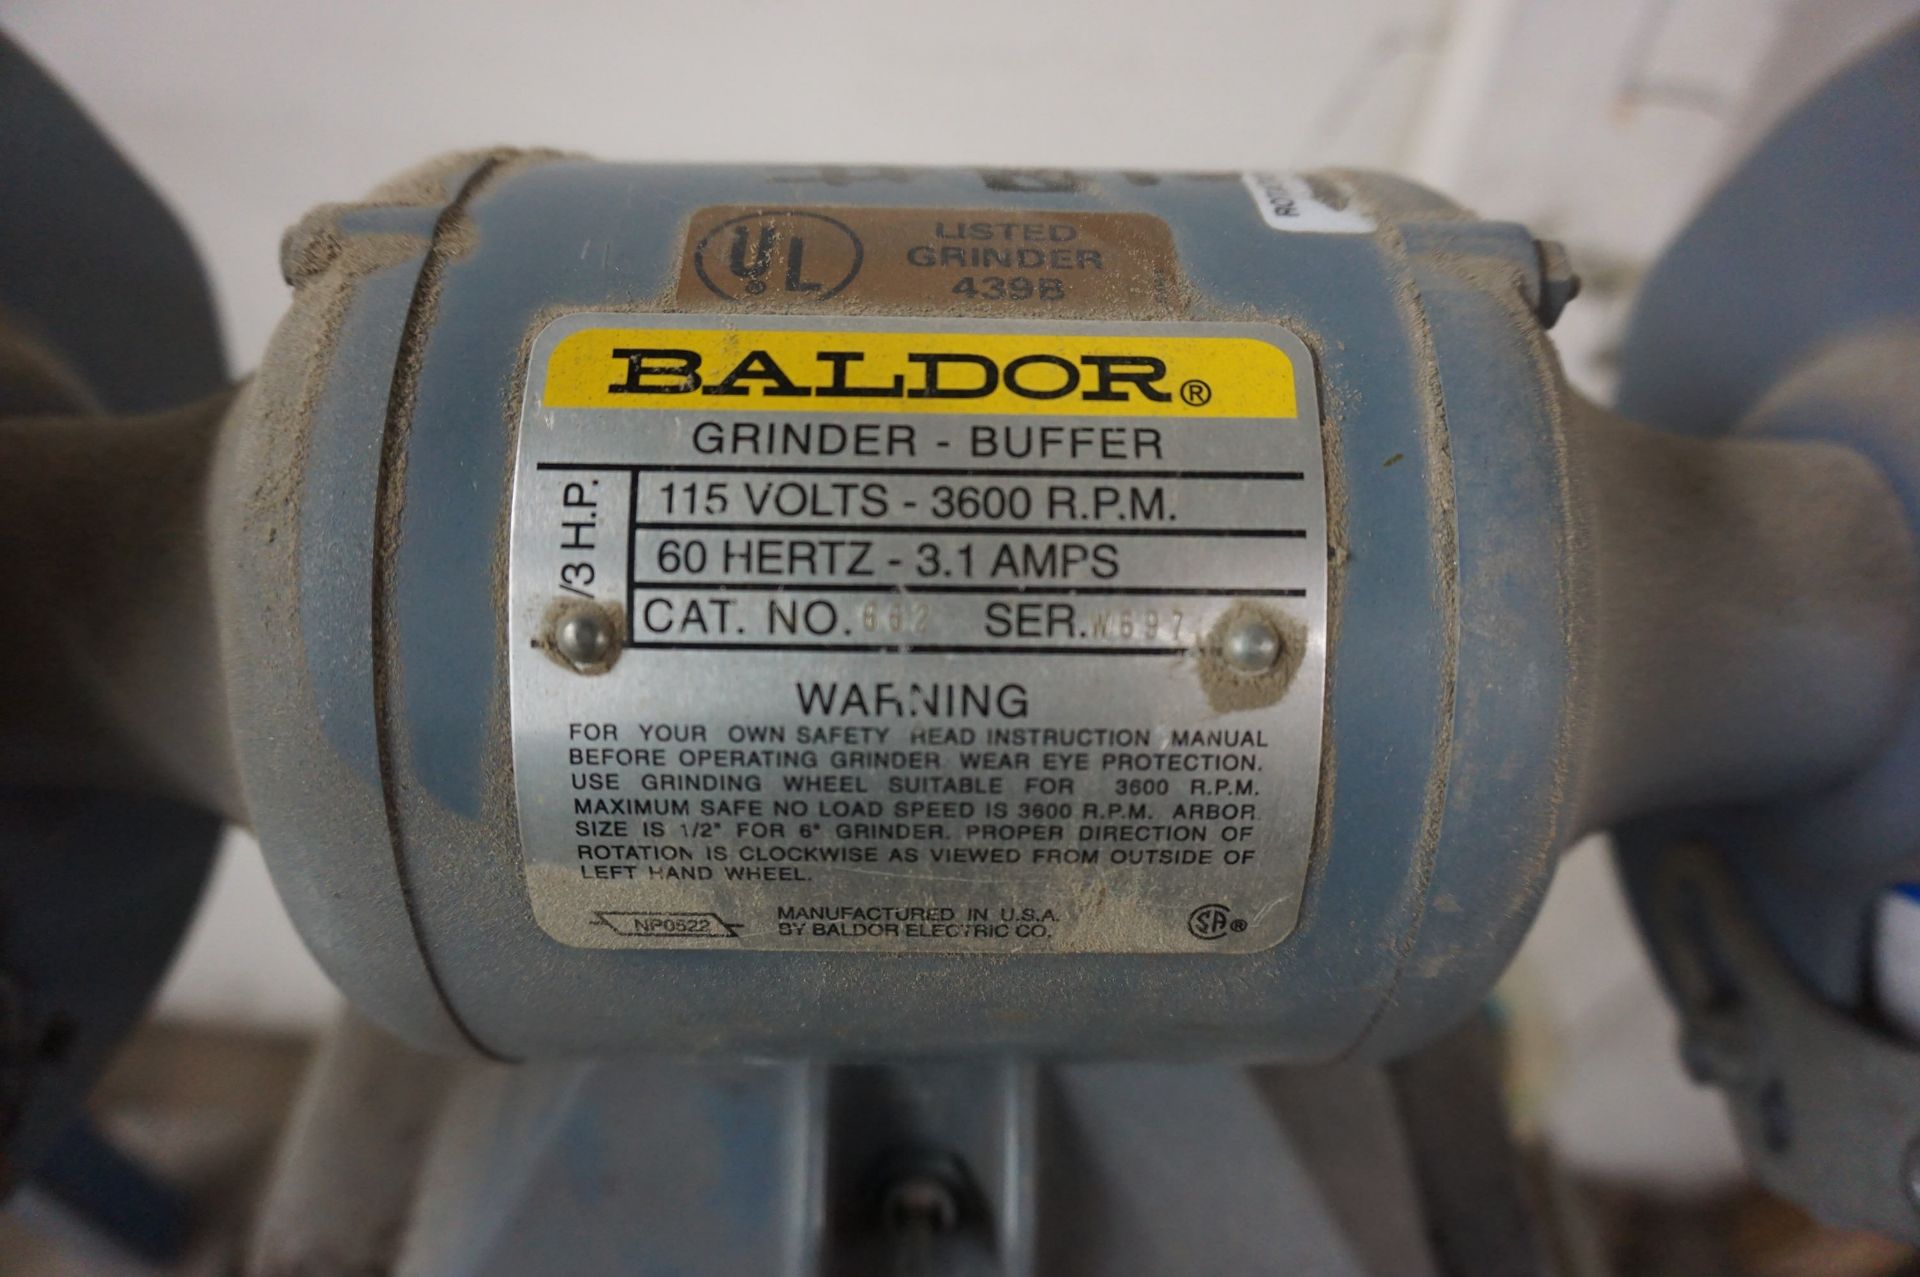 LOT TO INCLUDE: (1) BALDOR 662 GRINDER AND BUFFER, S/N W 697, (1) DAYTON MODEL 4TR21 SHOP VAC ** - Image 2 of 4